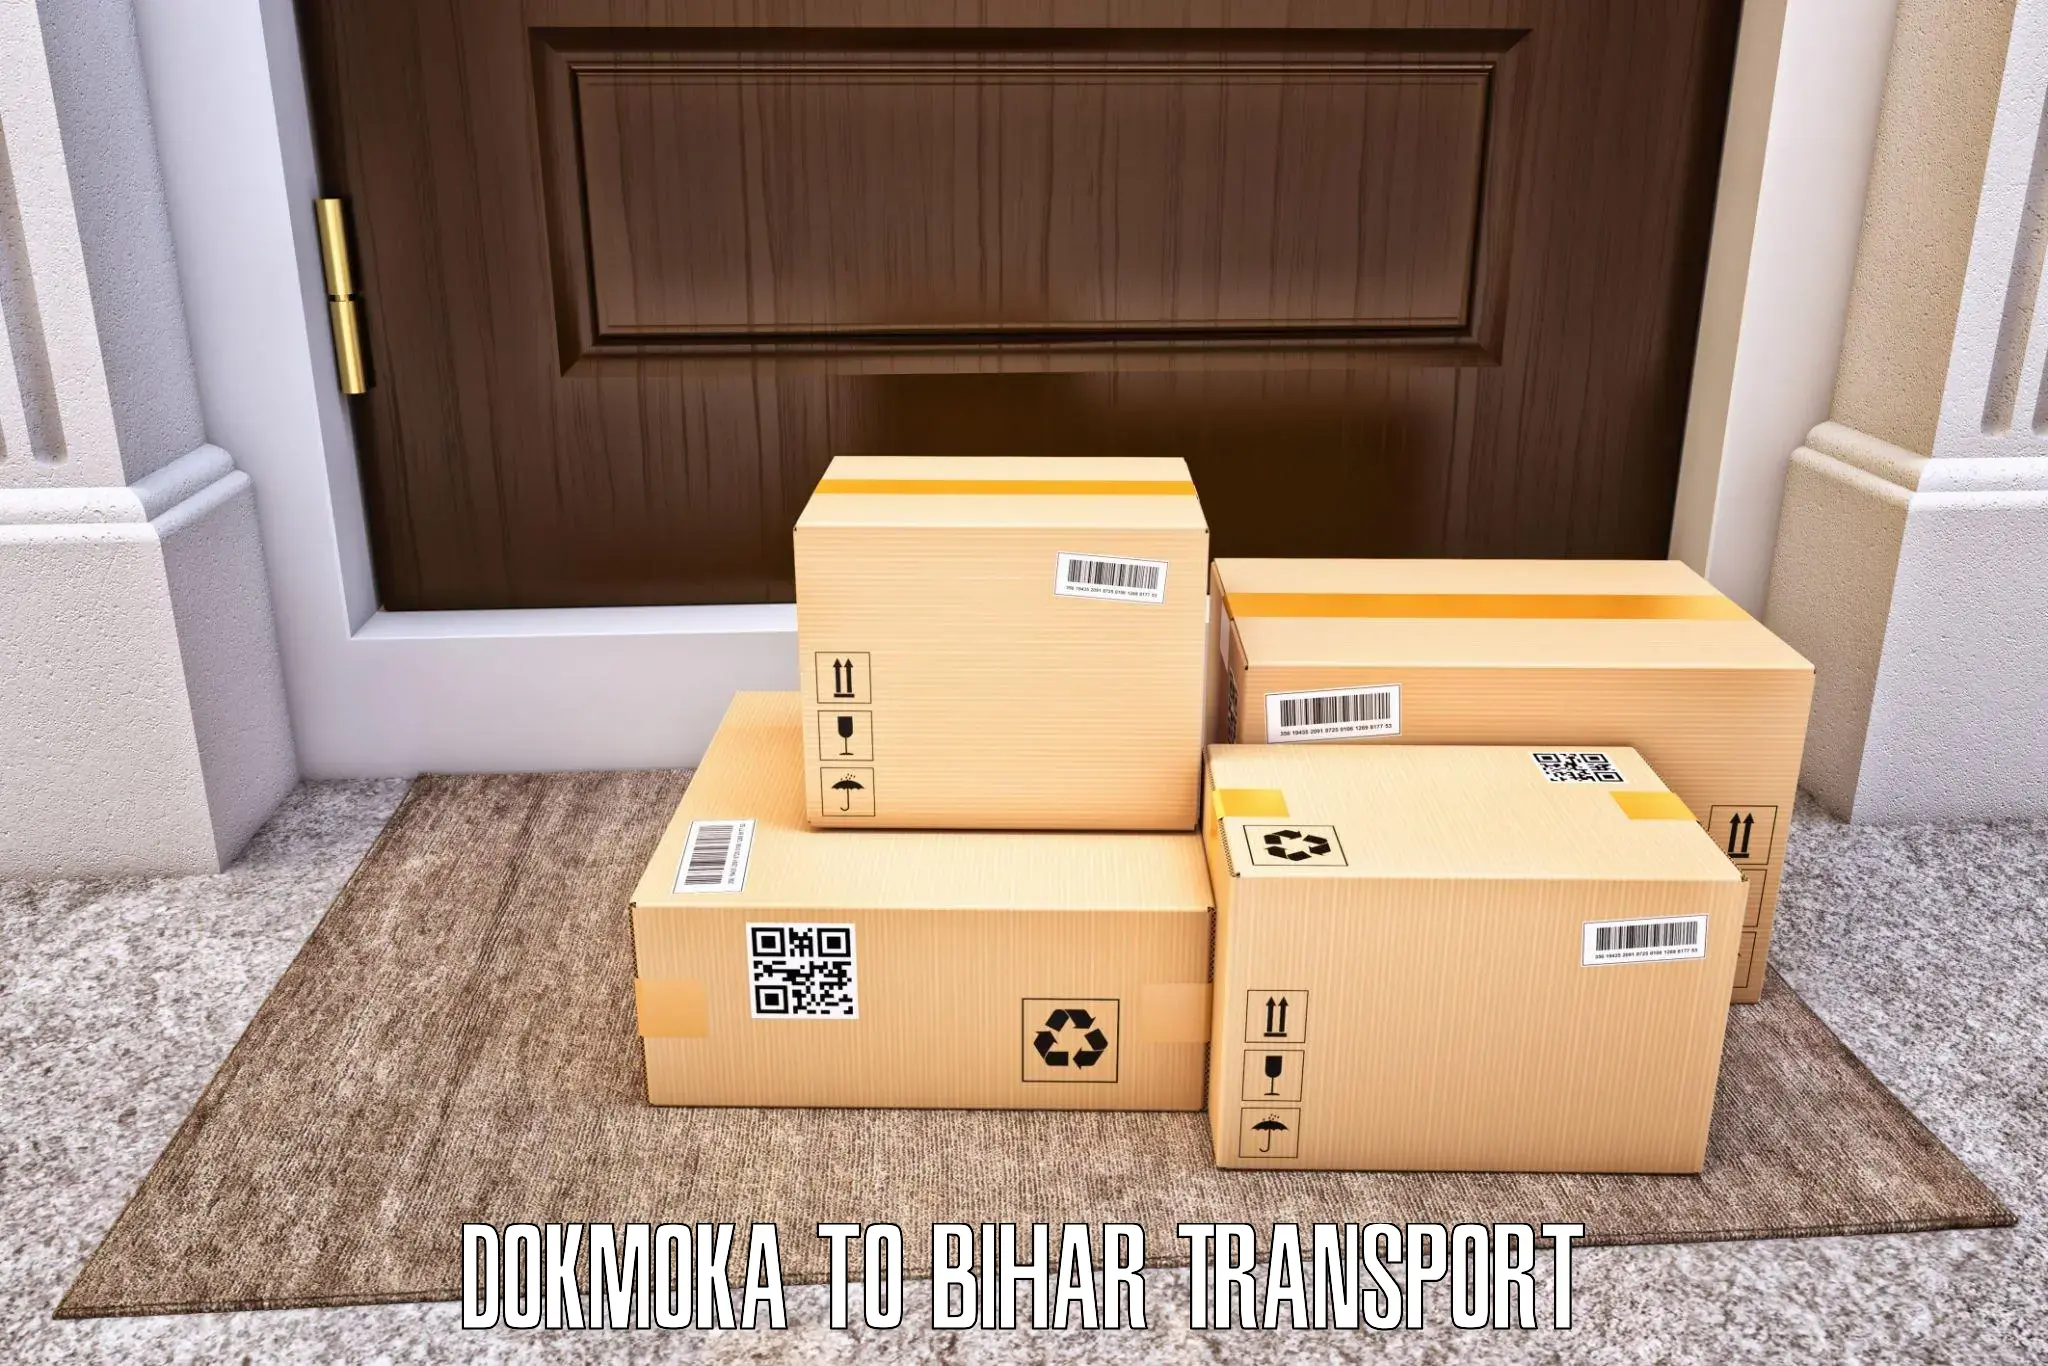 Daily parcel service transport Dokmoka to Ghogha